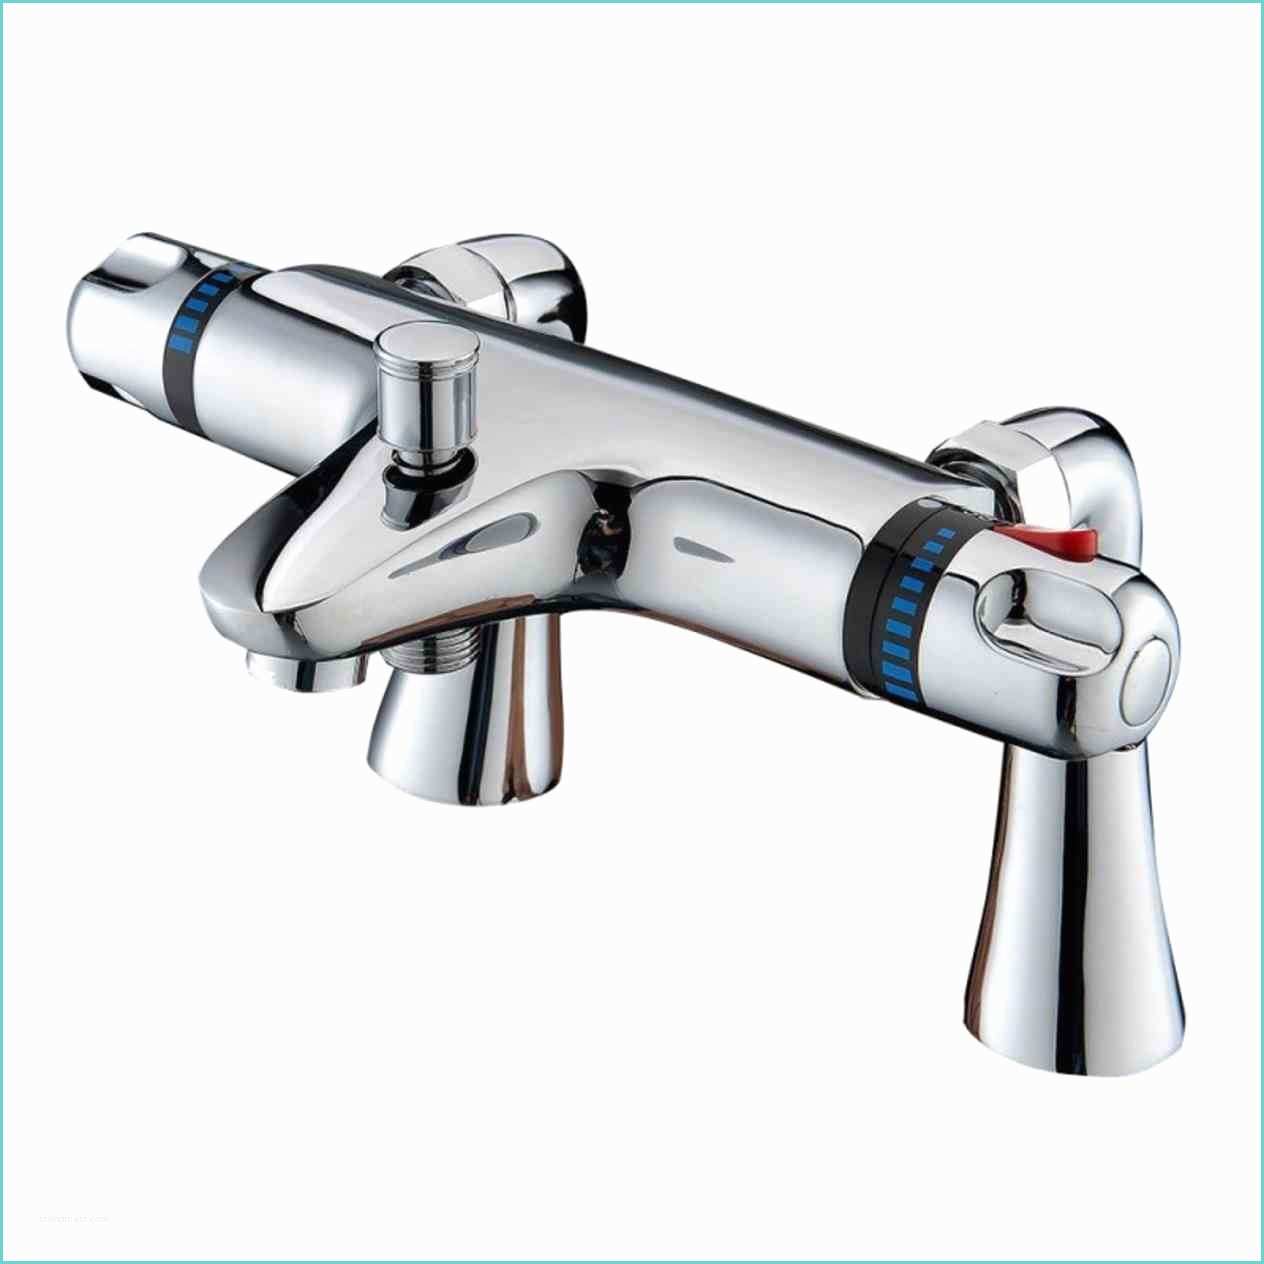 Thermostatic Shower Mixer Taps thermostatic Bath Shower Mixer Valve thermostat Manual